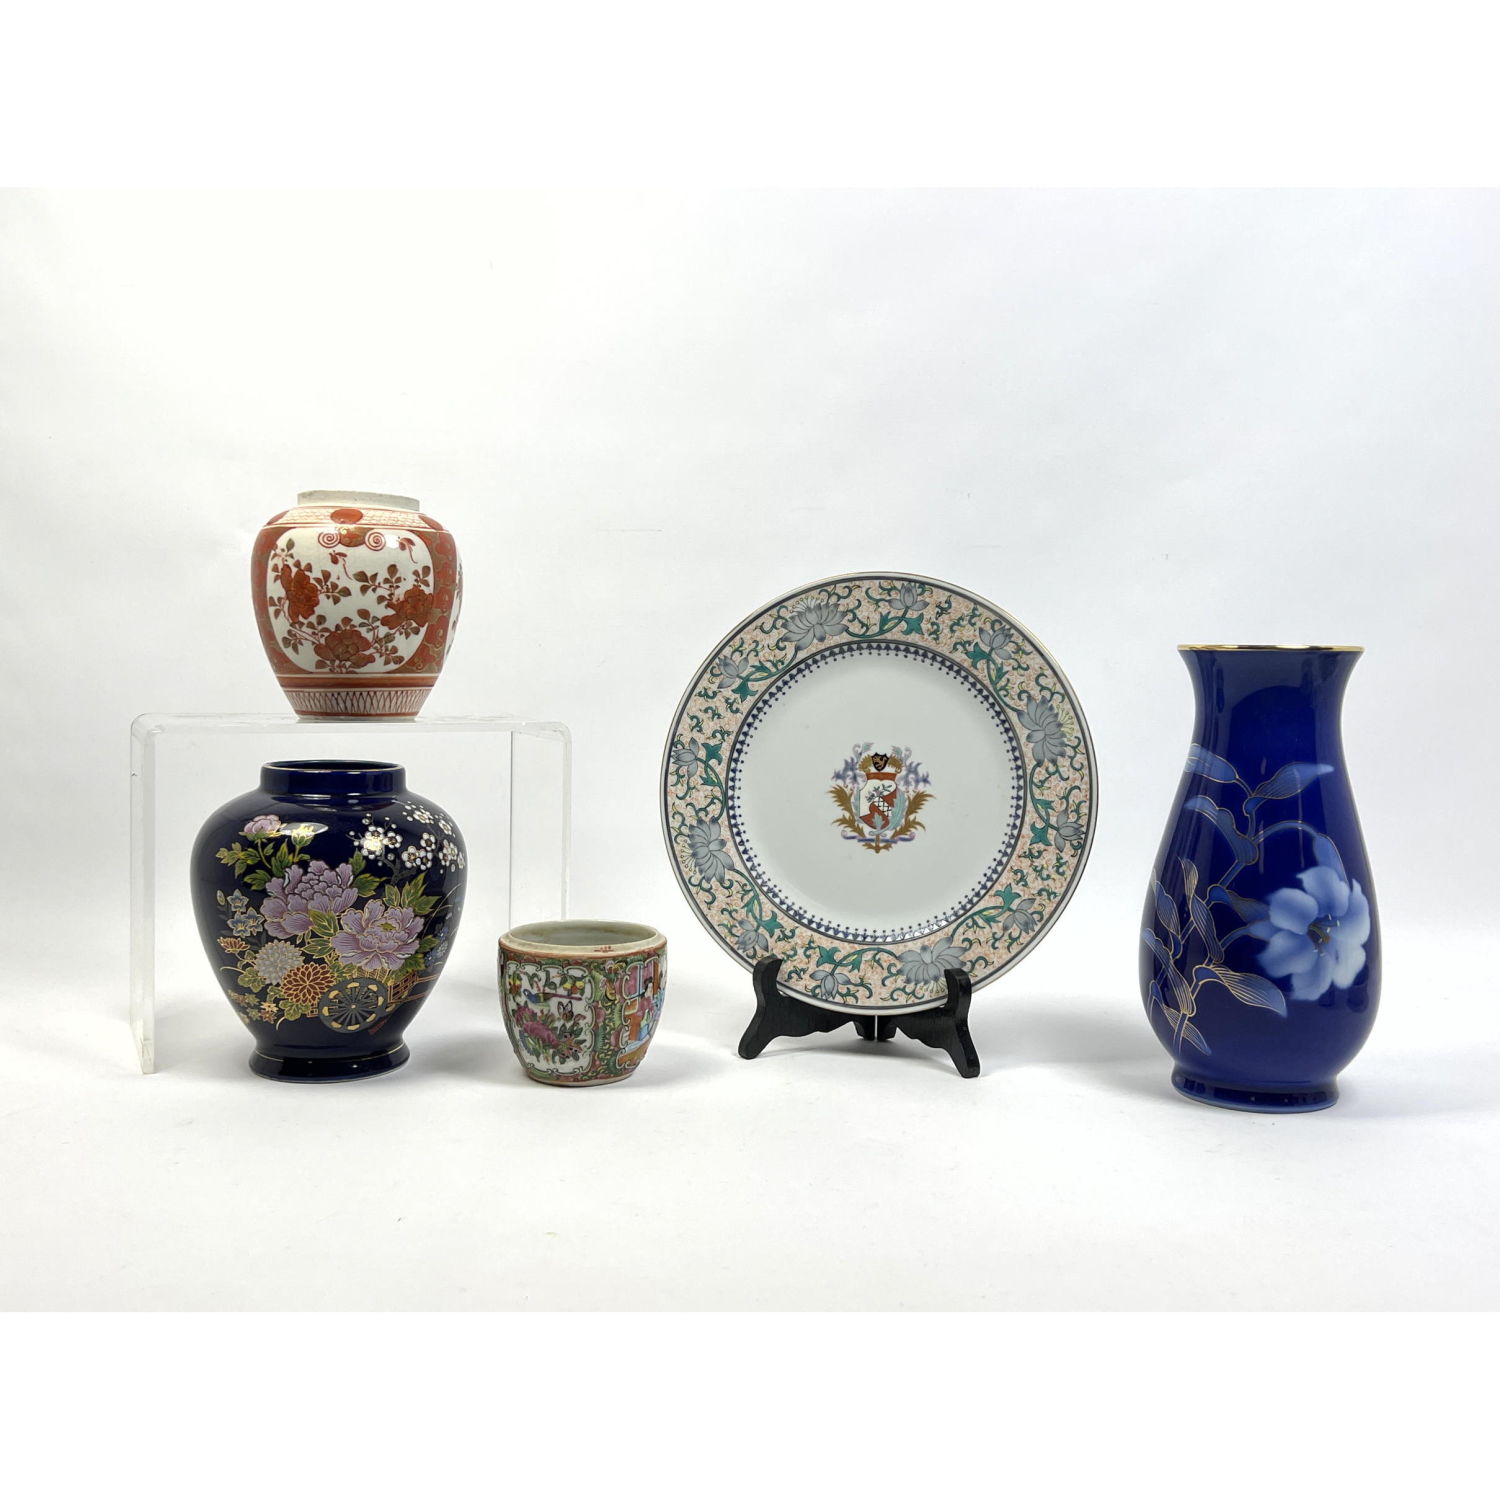 5pc Pottery and Porcelain Wares.